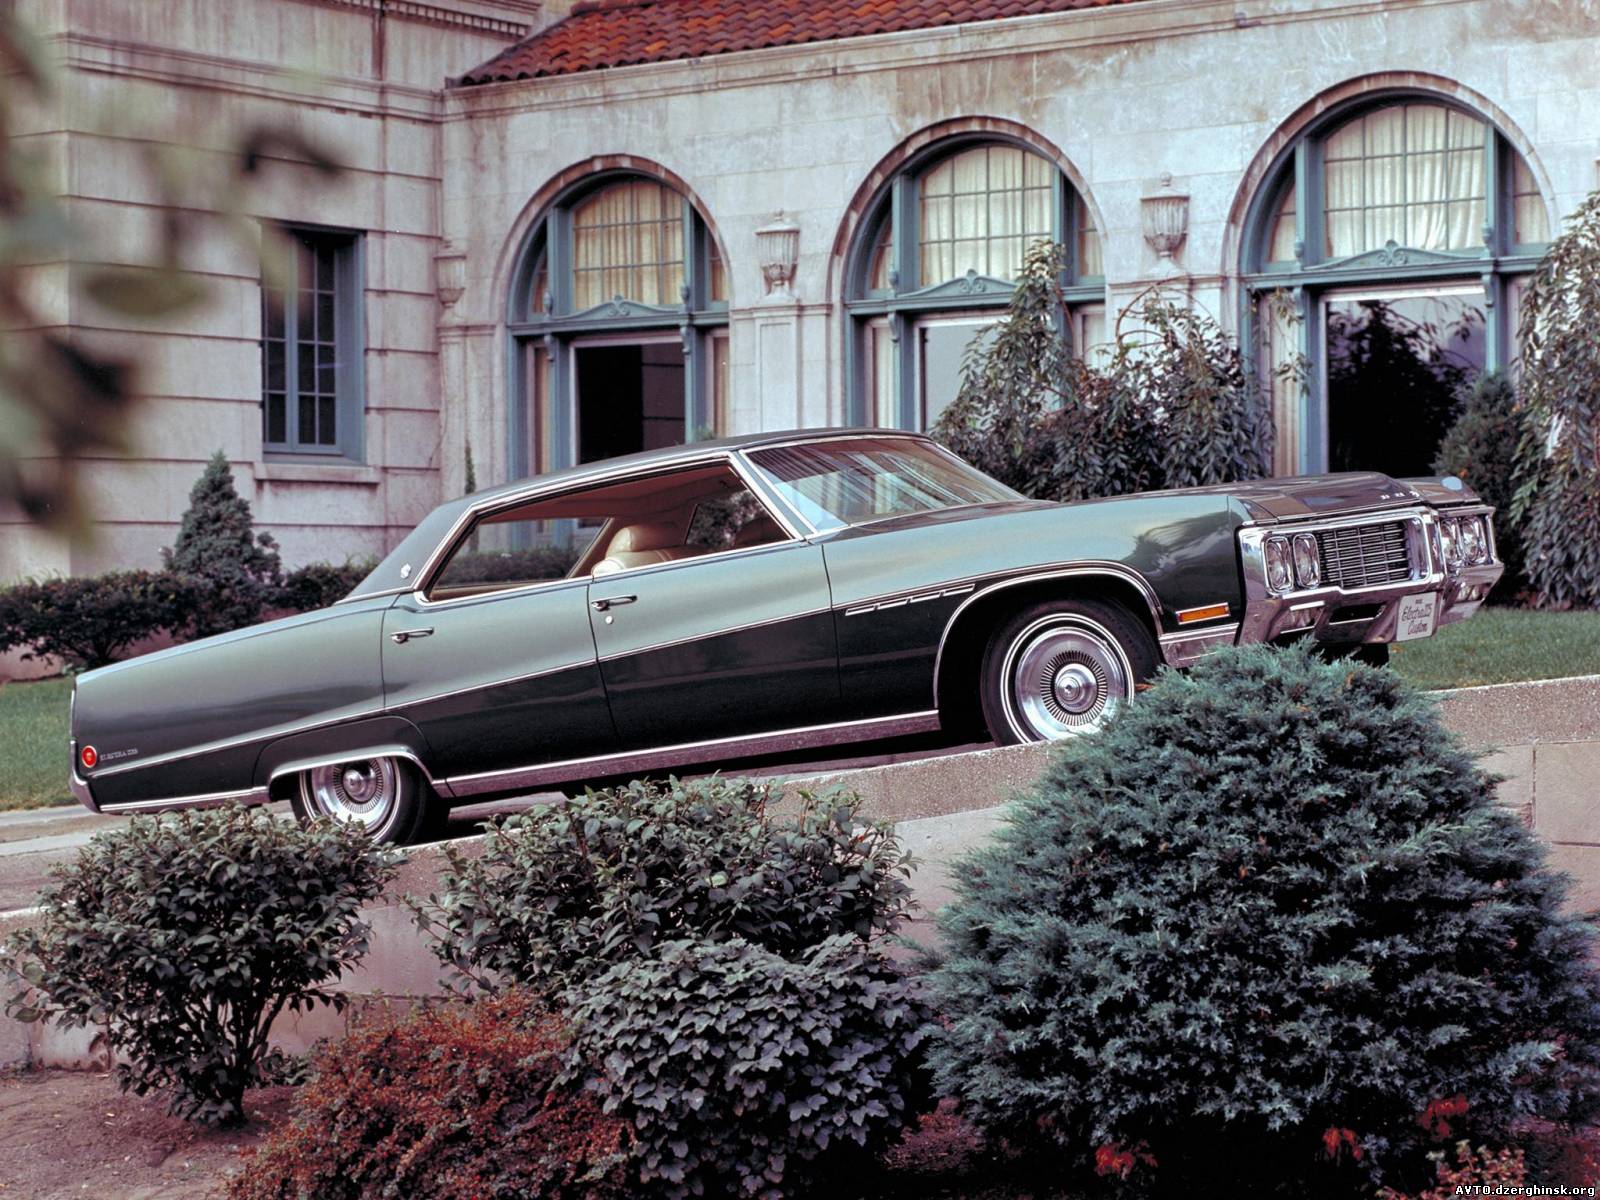 012. Buick Electra 225 1970